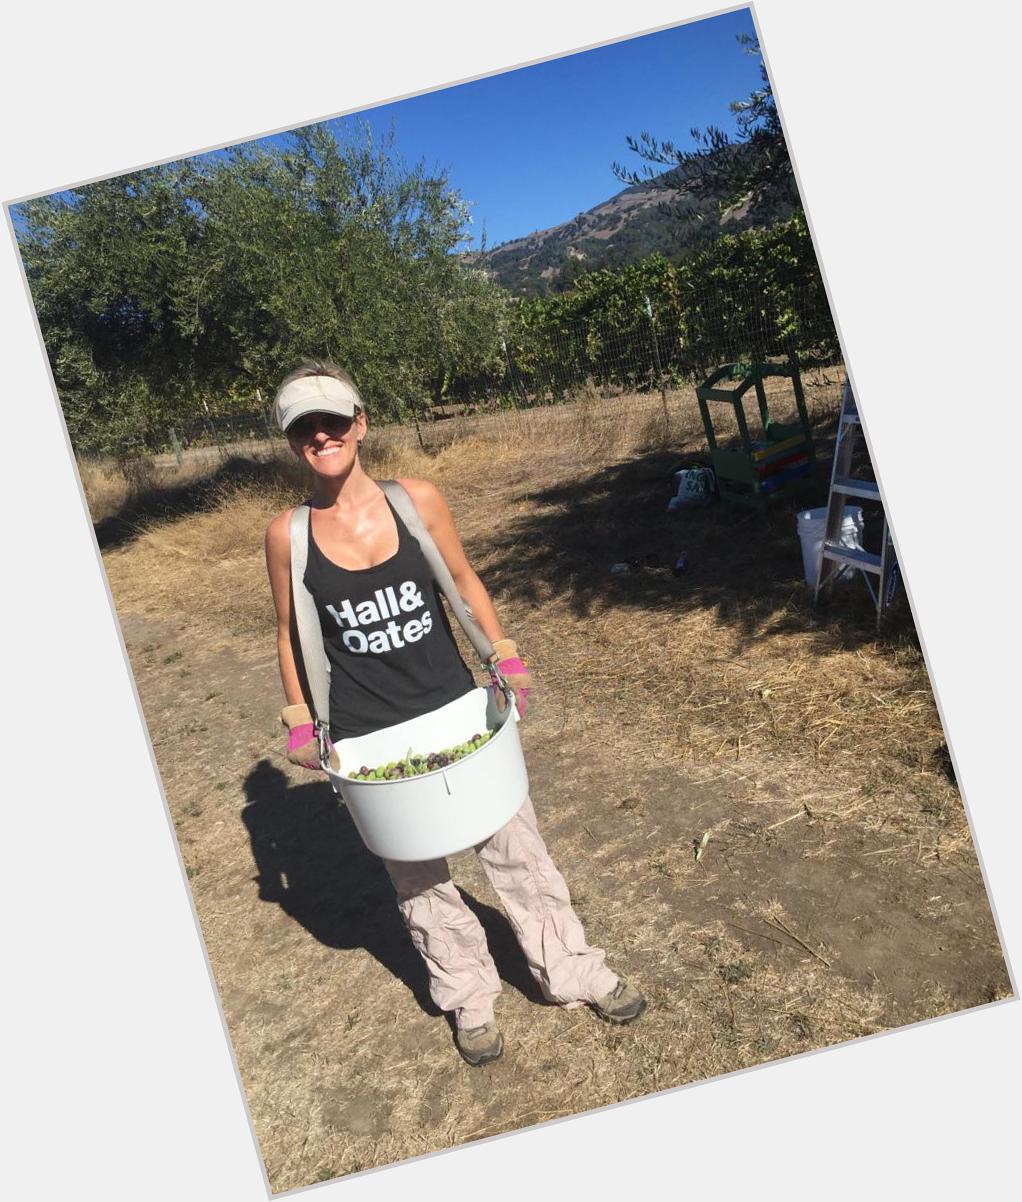 Happy birthday to Daryl Hall! Picking Alexander Valley olives in your honor.  